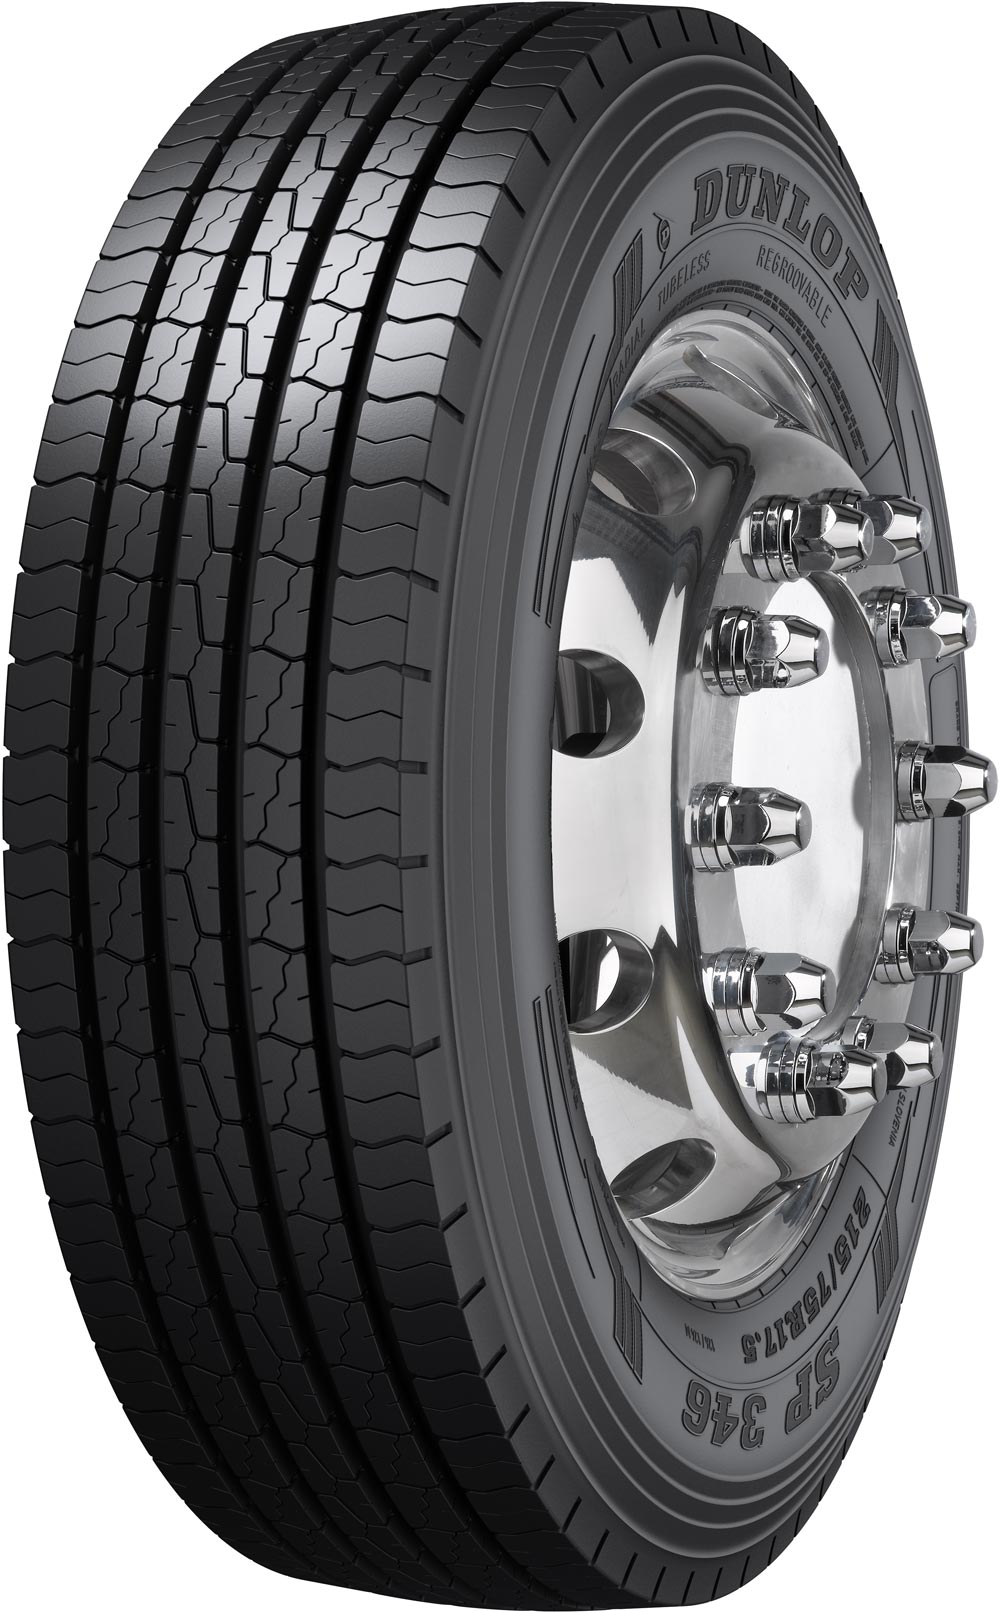 product_type-heavy_tires DUNLOP SP346 18 TL 295/80 R22.5 154M